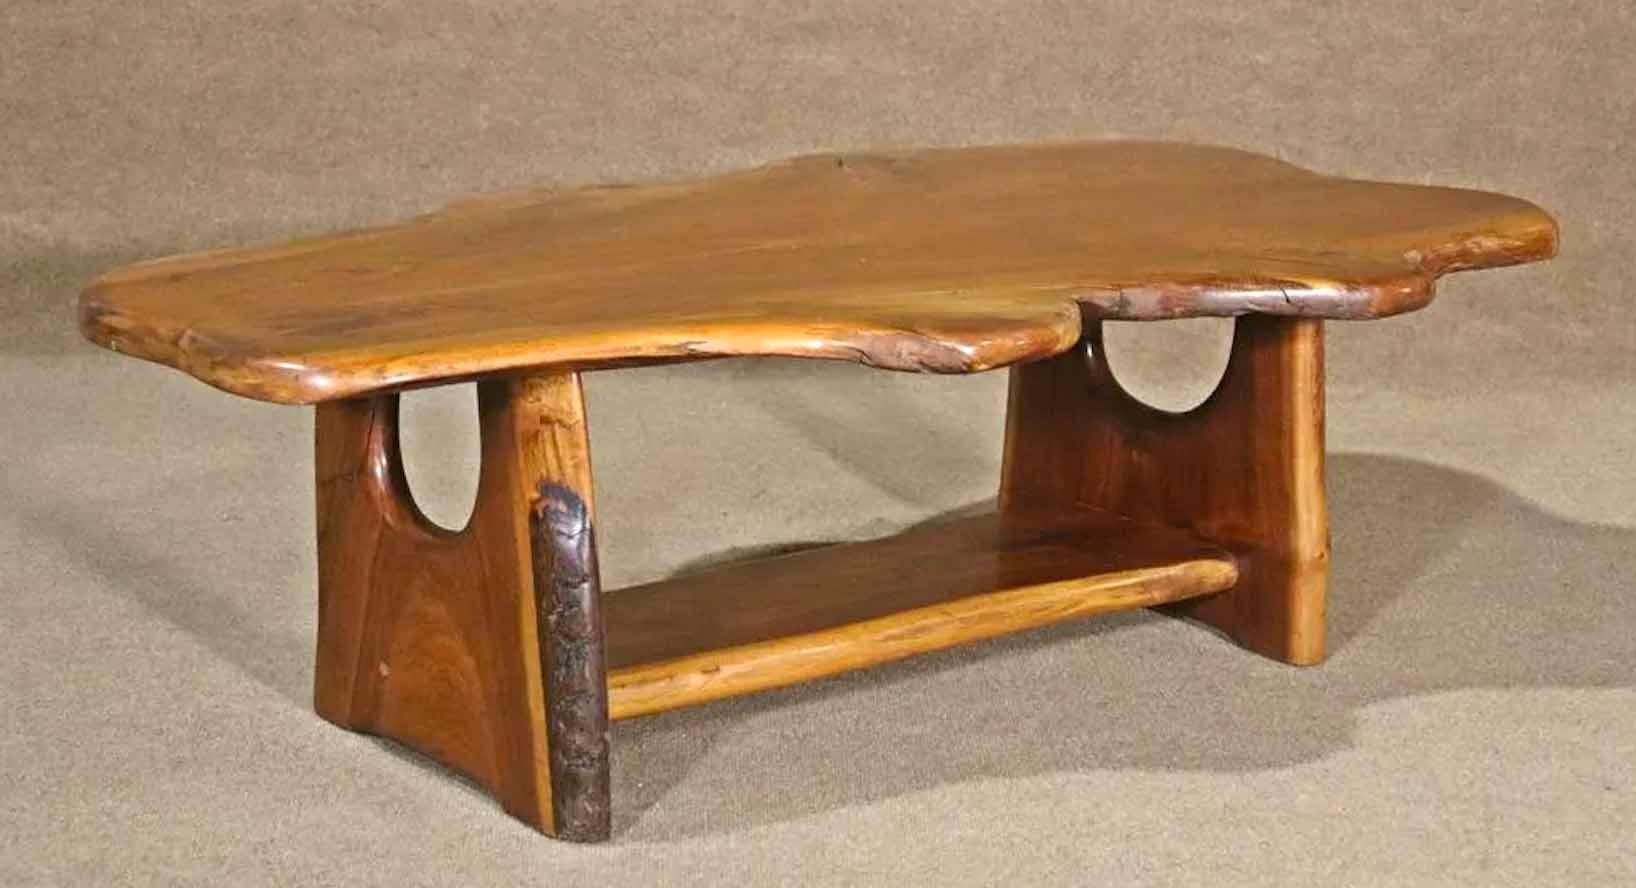 Mid-century modern coffee table with a single slab set on an all wood base. Great live edge organic form.
Please confirm location.